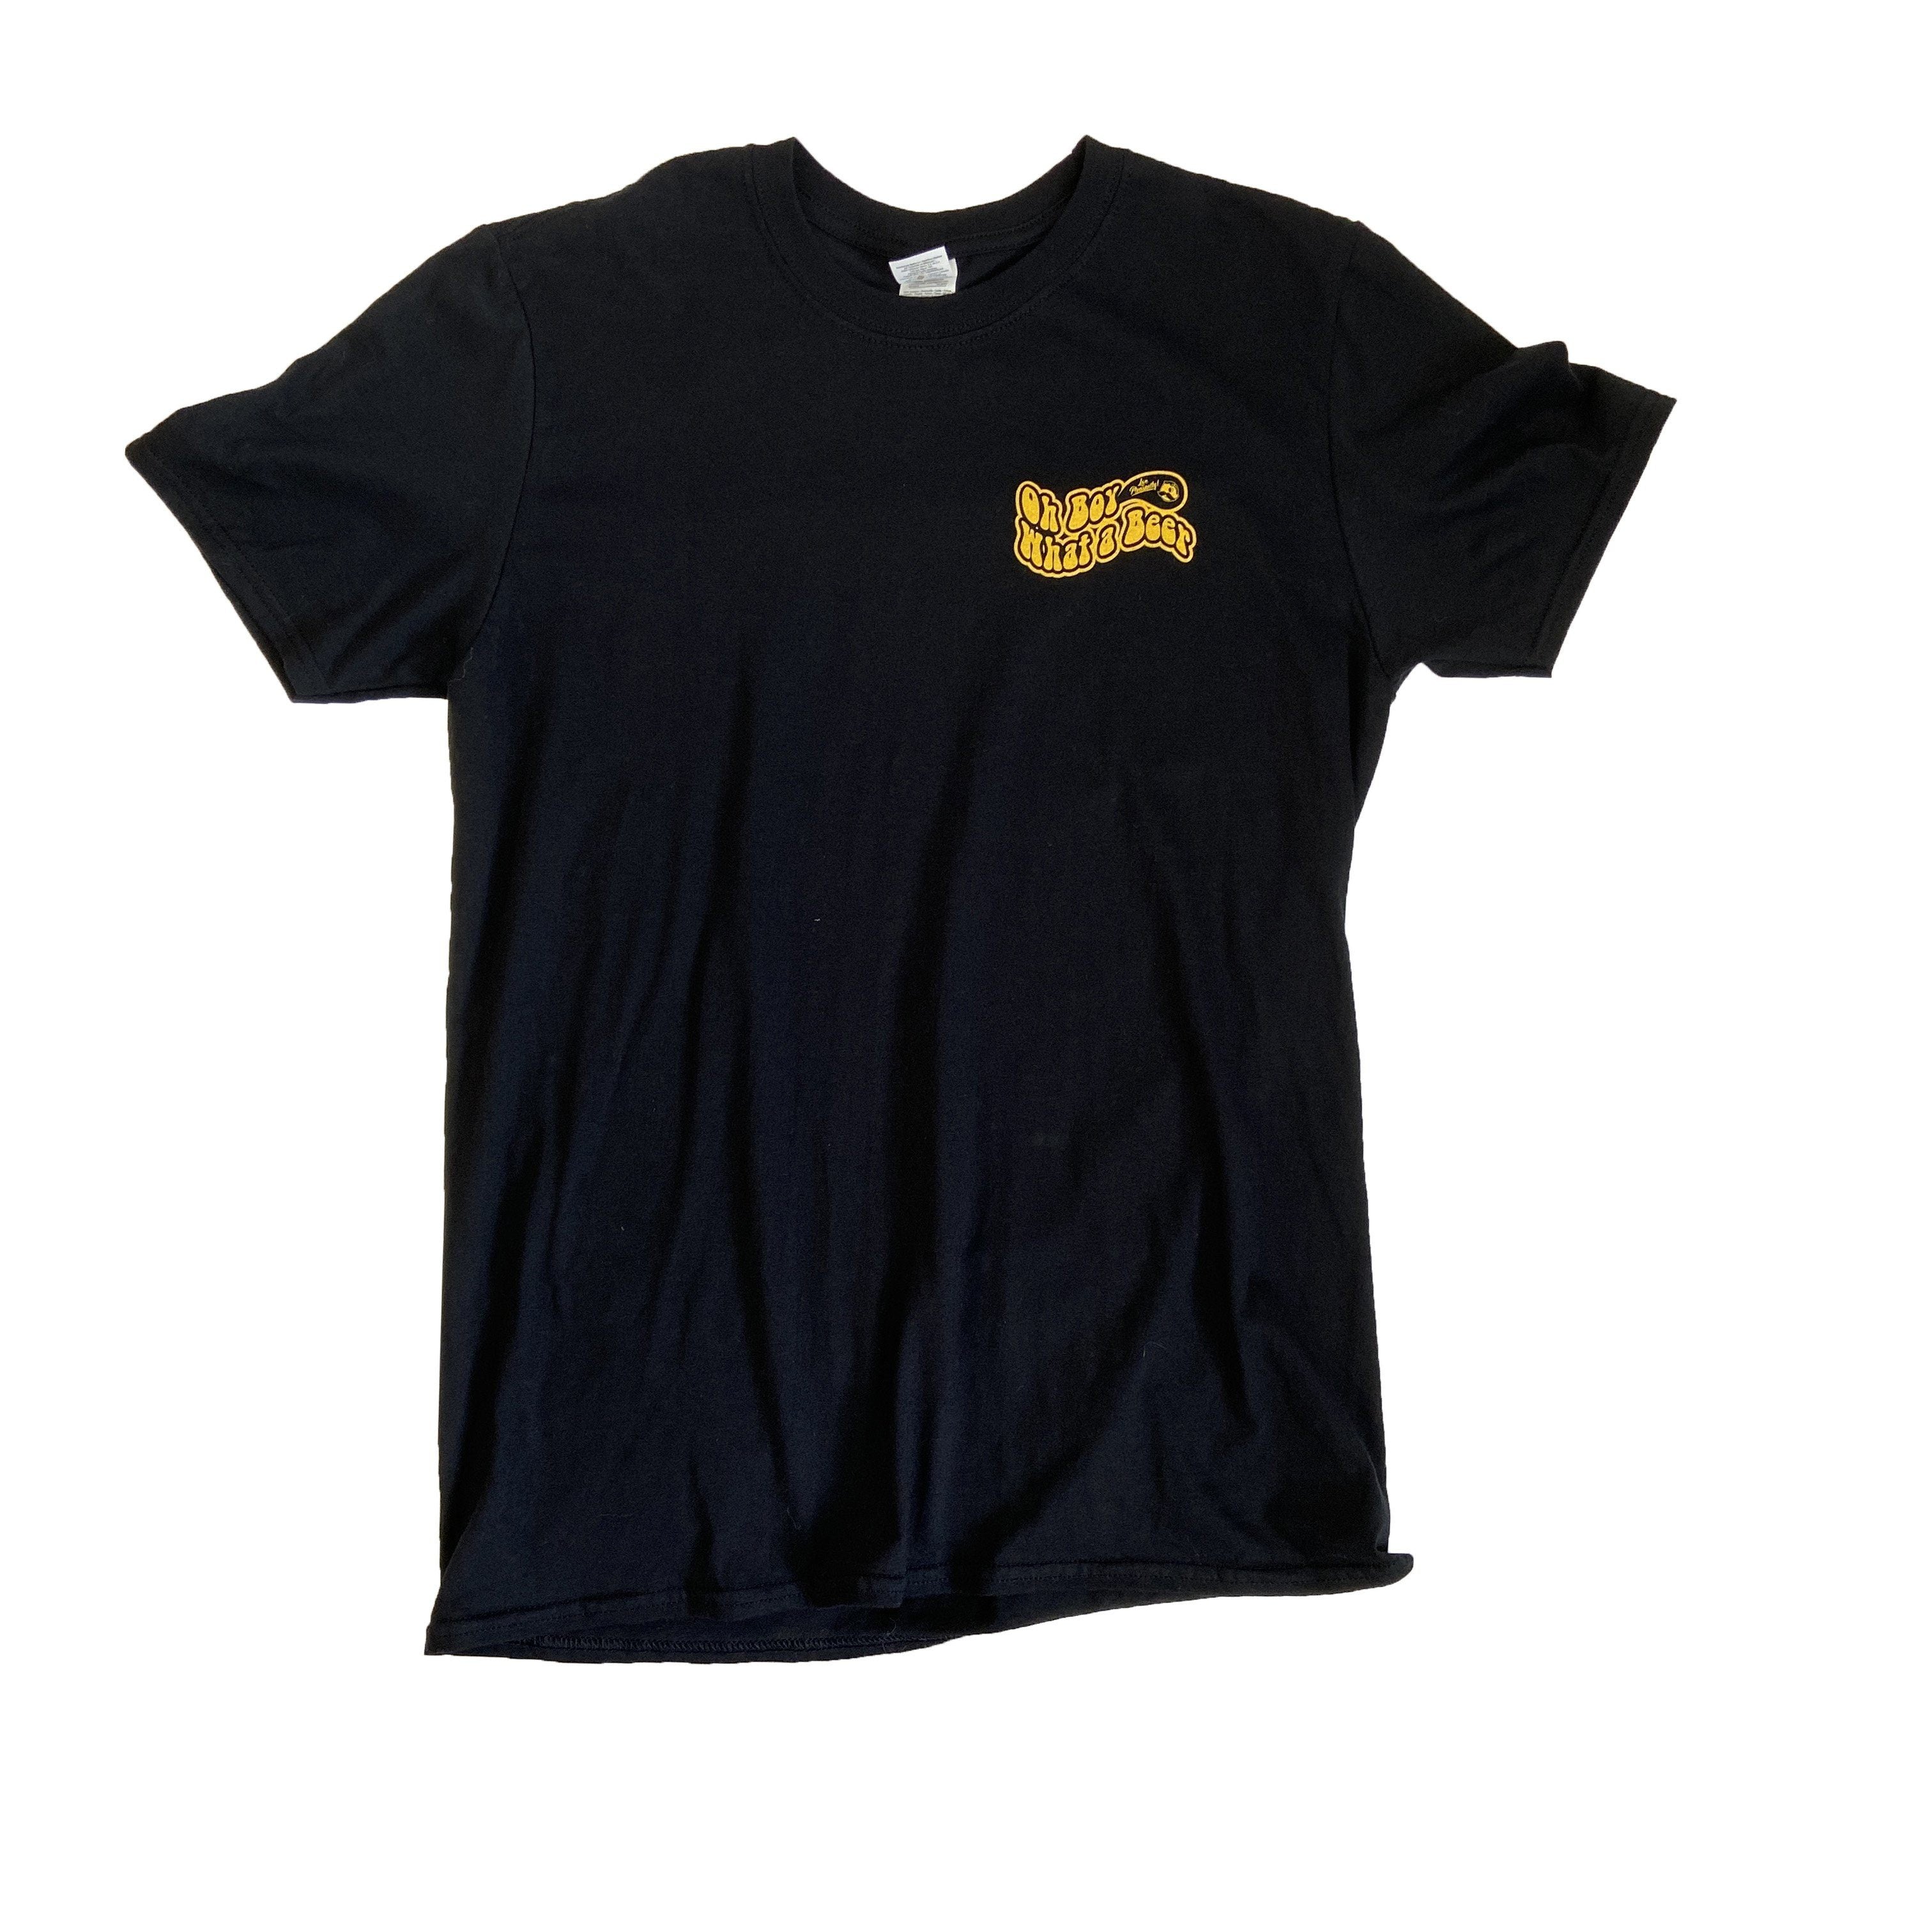 Oh Boy What a Beer - Land of Pleasant Living 70's Retro (Black) / Shirt - Route One Apparel